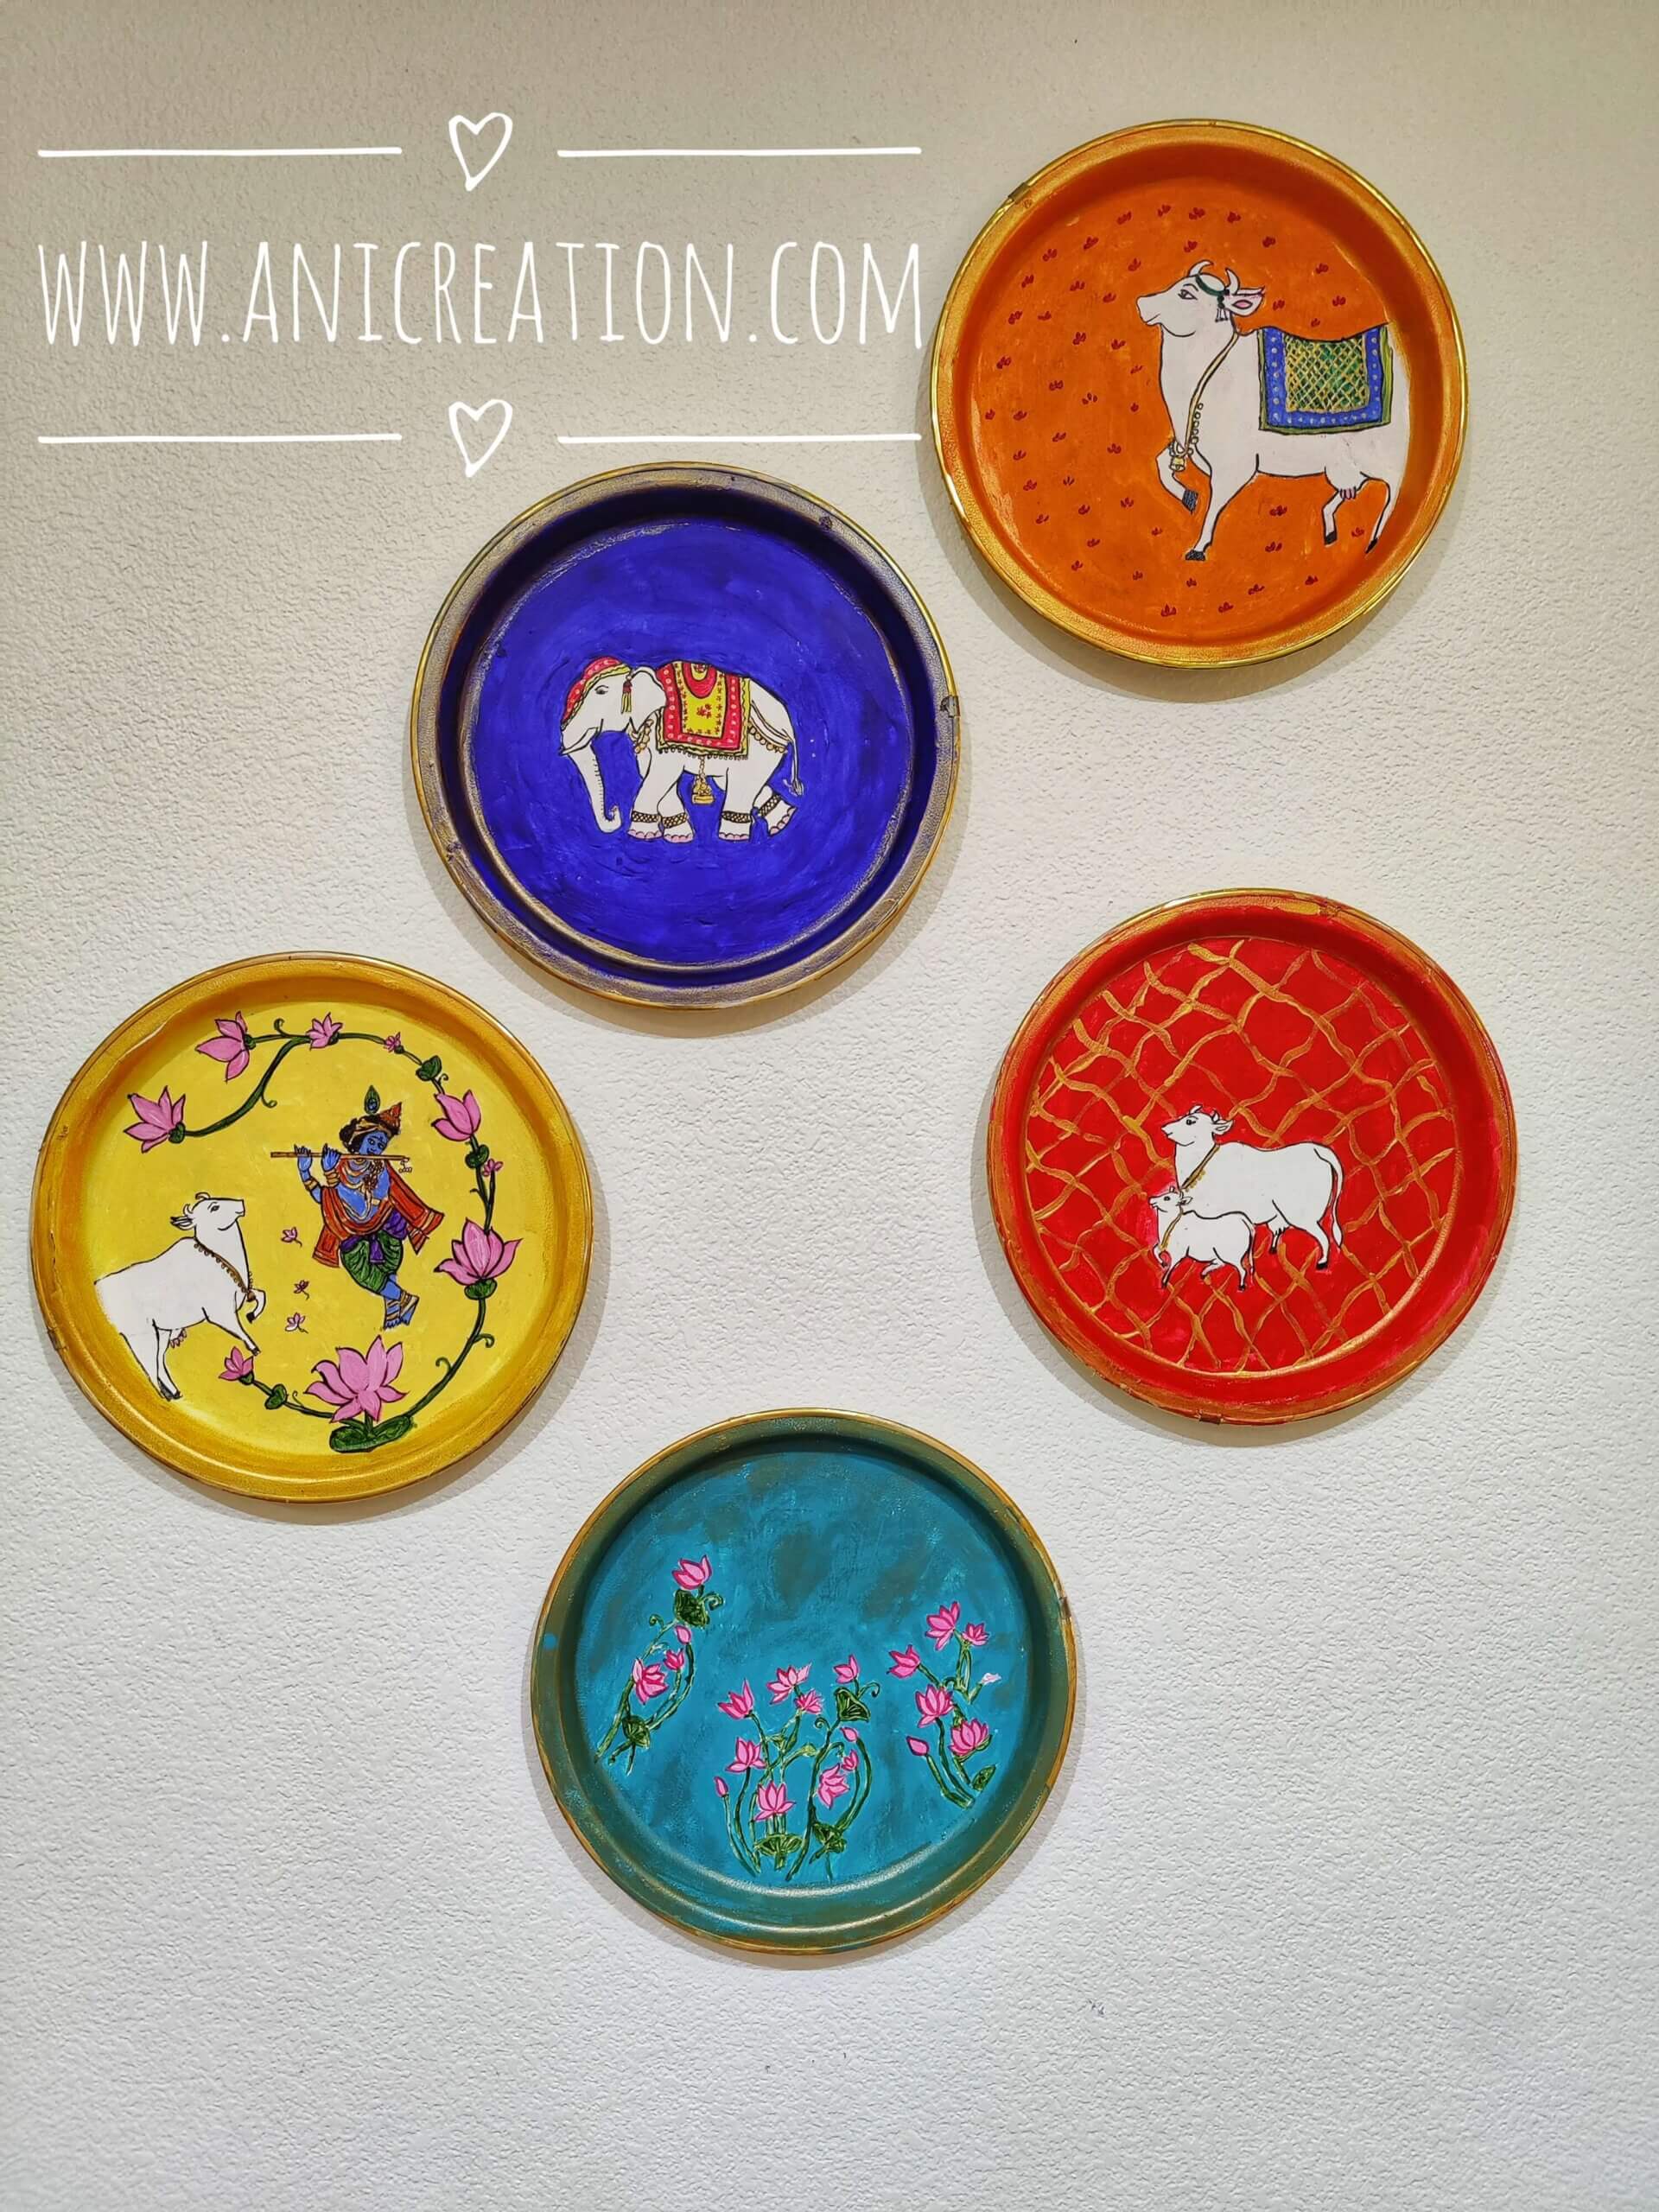 Pichwai wall painting decor – Recycle old plate